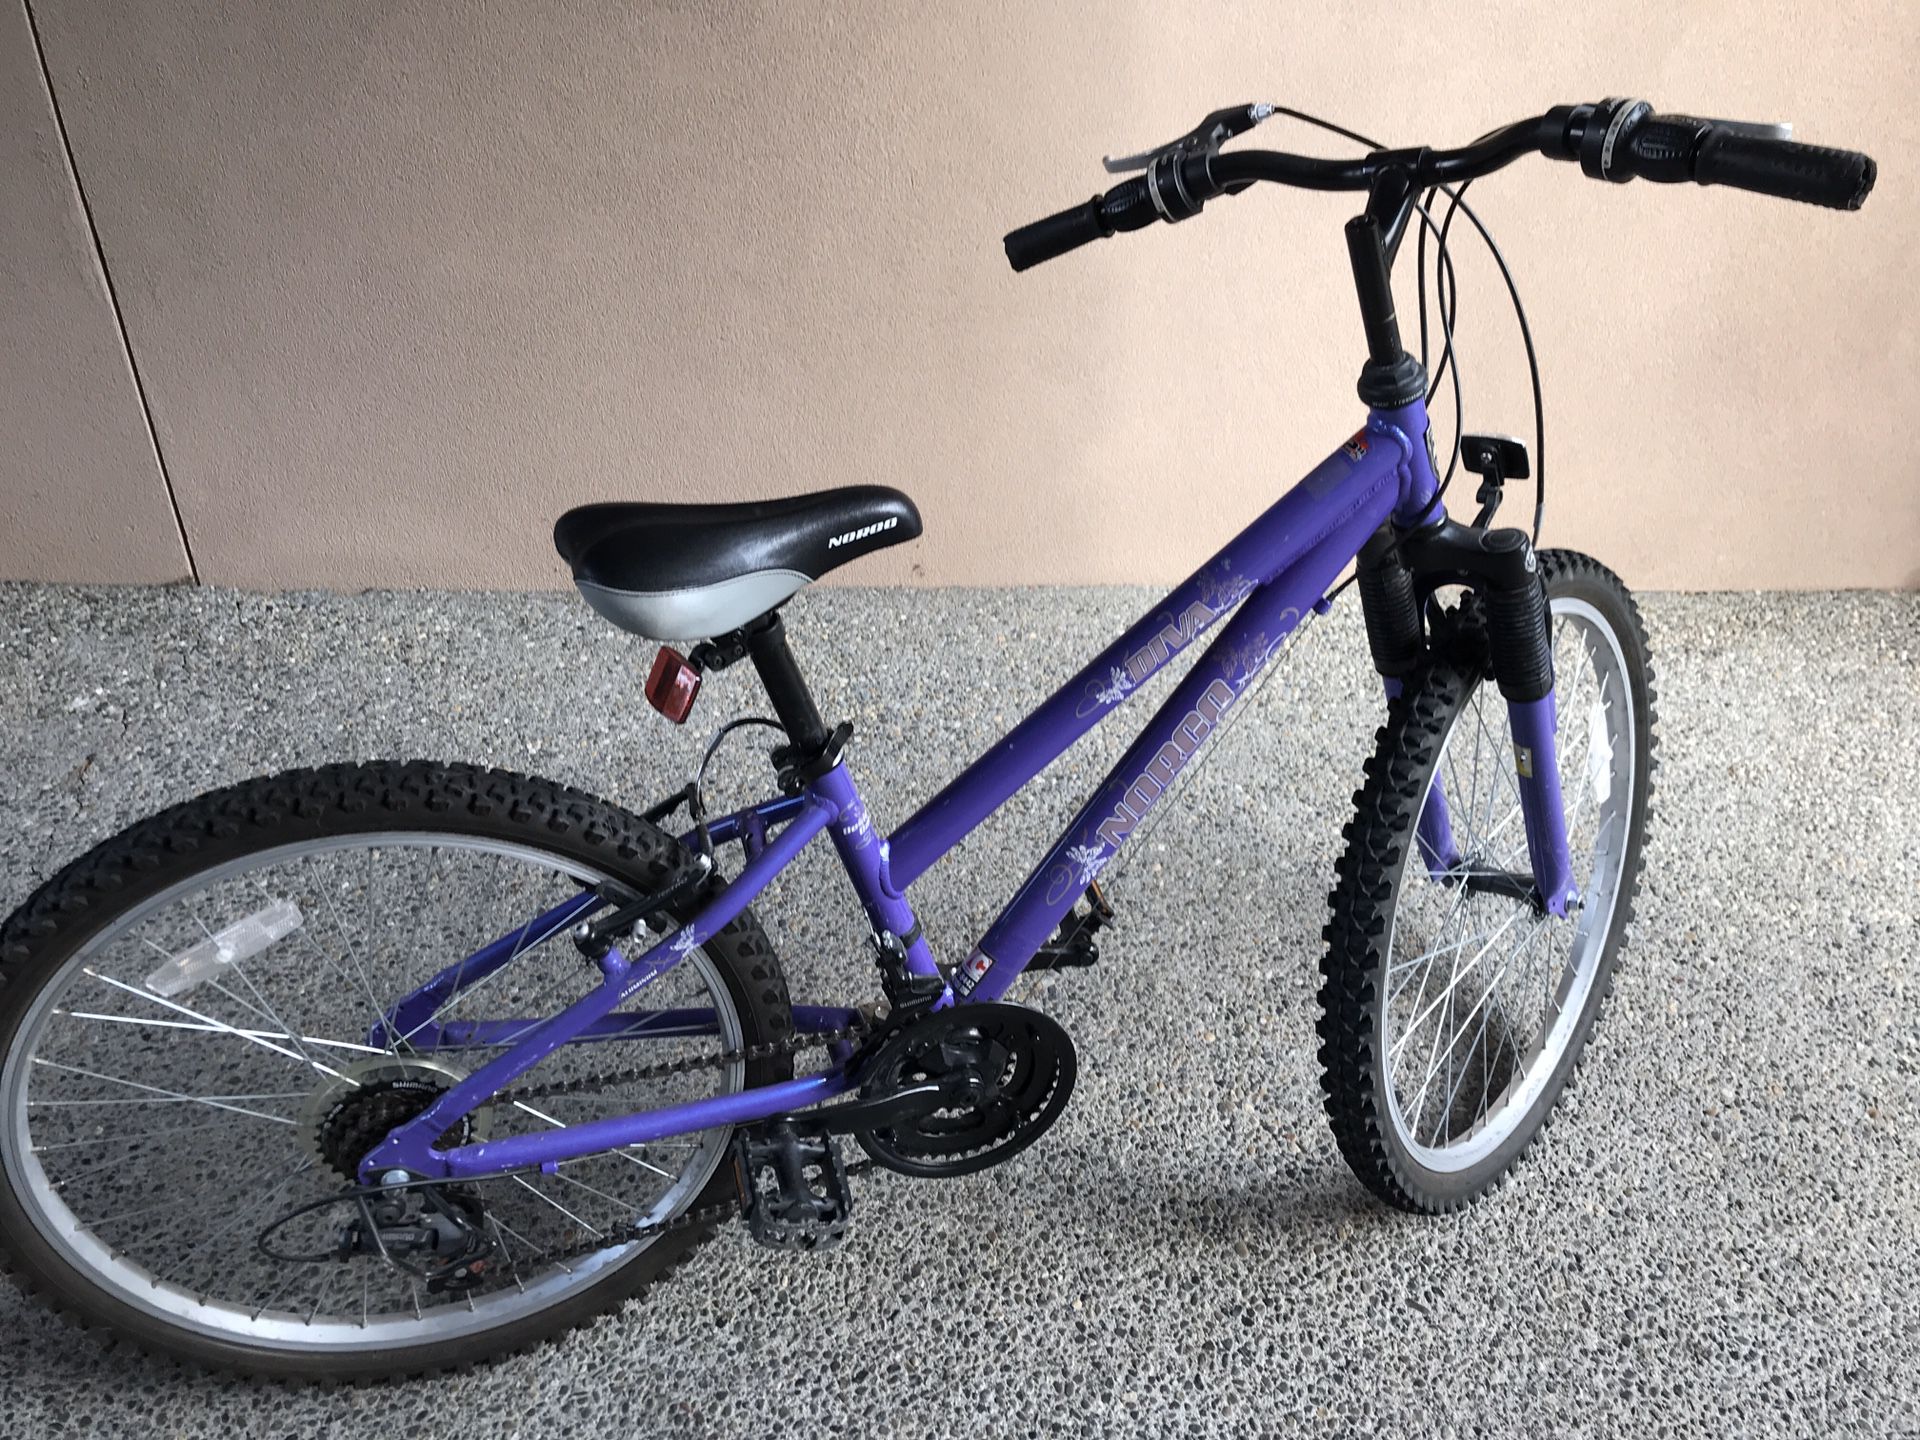 24” Norco Diva Bike for kids - great condition